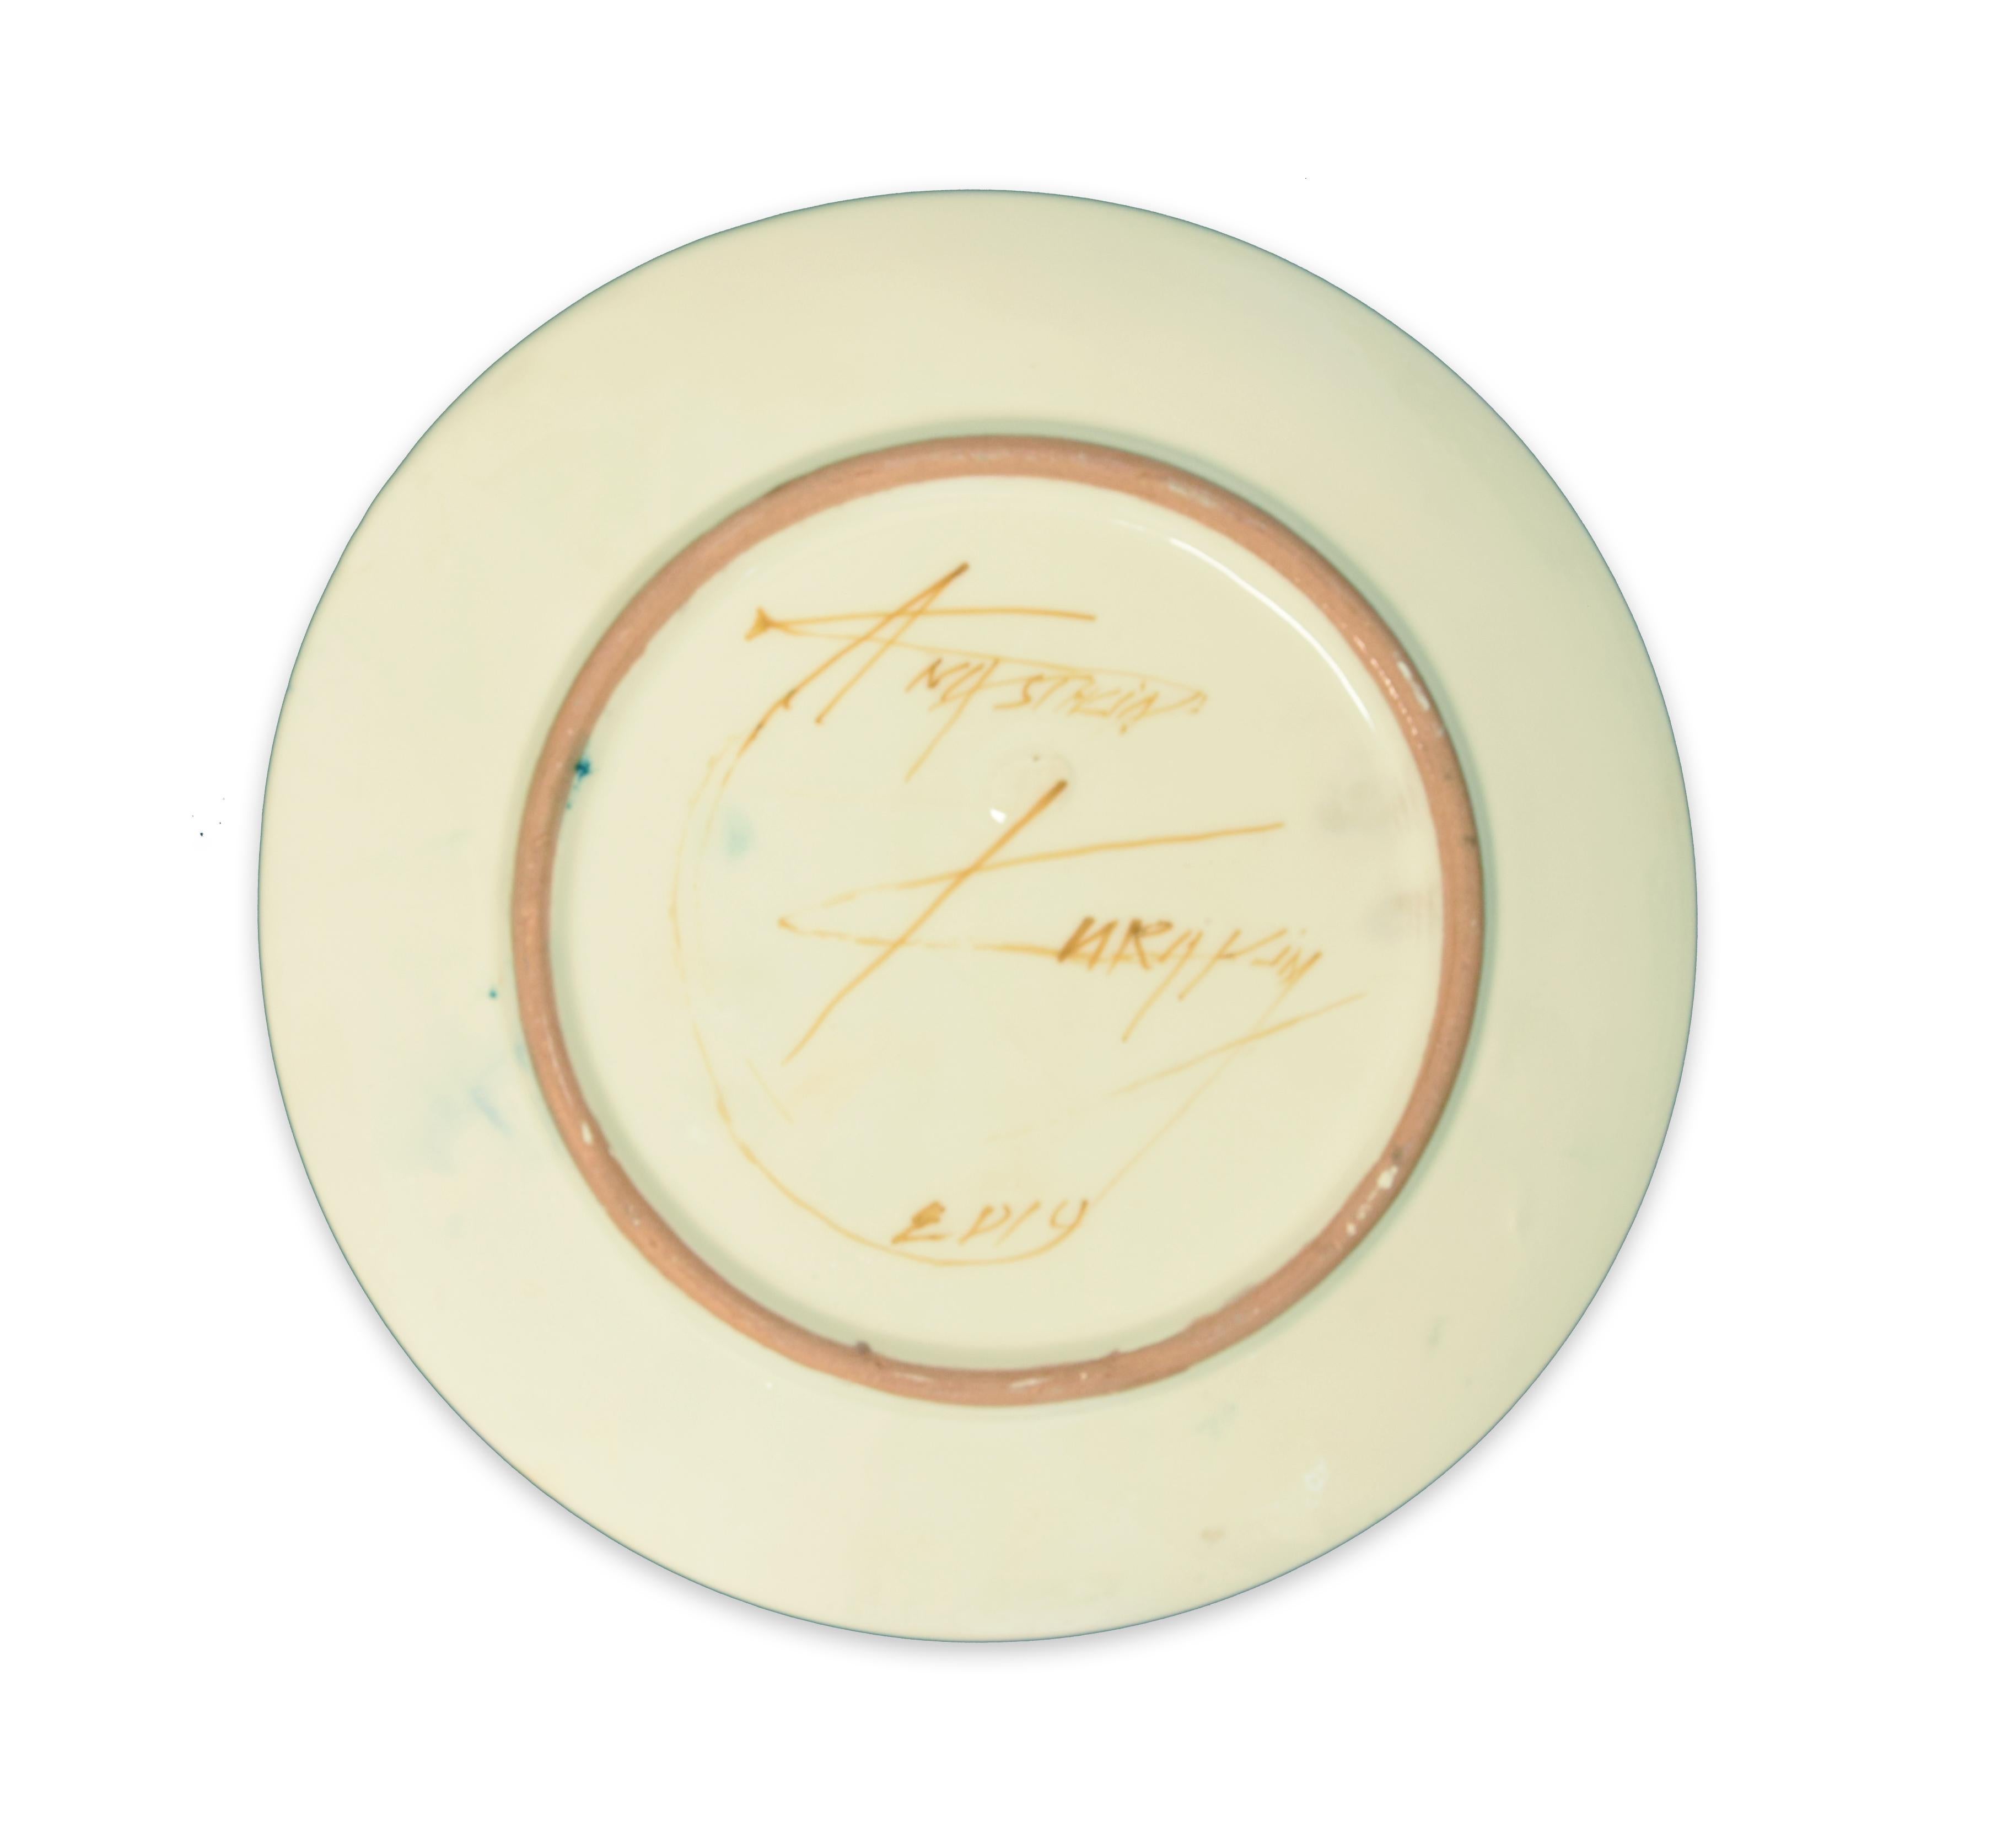 Teardrops is a beautiful hand-made flat ceramic dish realized by the Russian emerging artist, Anastasia Kurakina in 2019. 

Signed and dated by the artist on the back.

This is a ceramic dish representing a crying woman with particular attention to